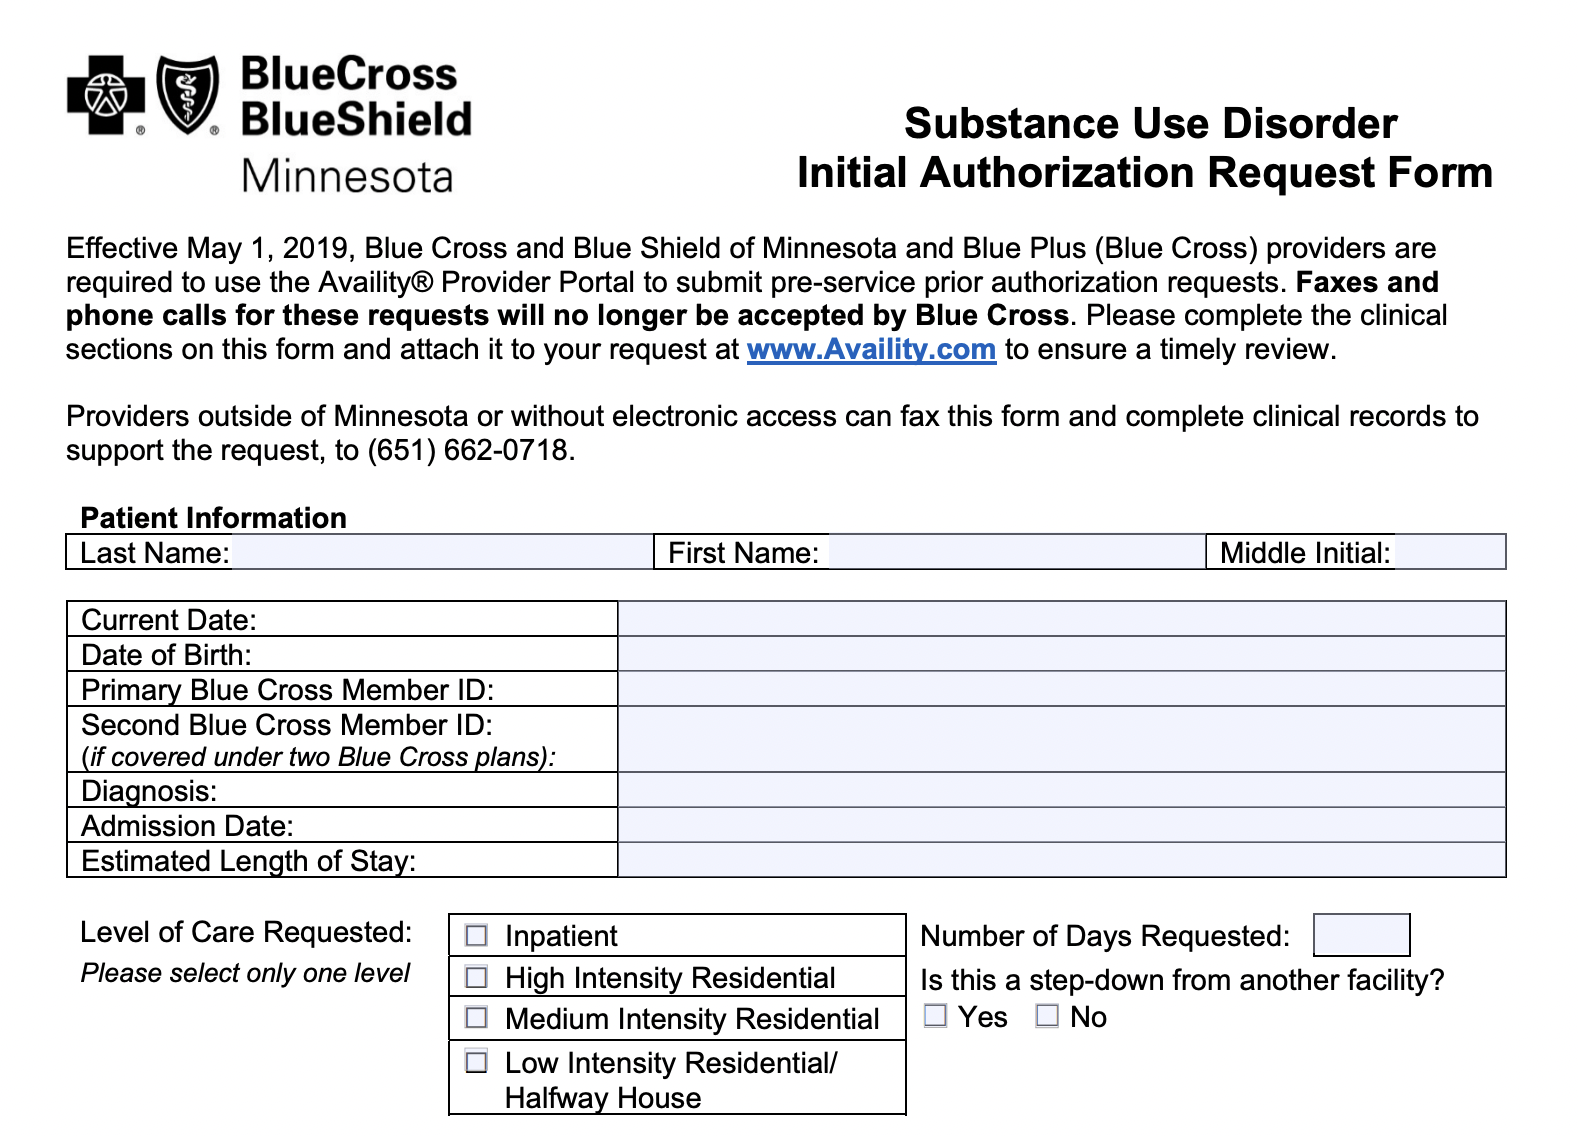 Submitting secondary anthem blue cross blue shield claims to availity cognizant amex card